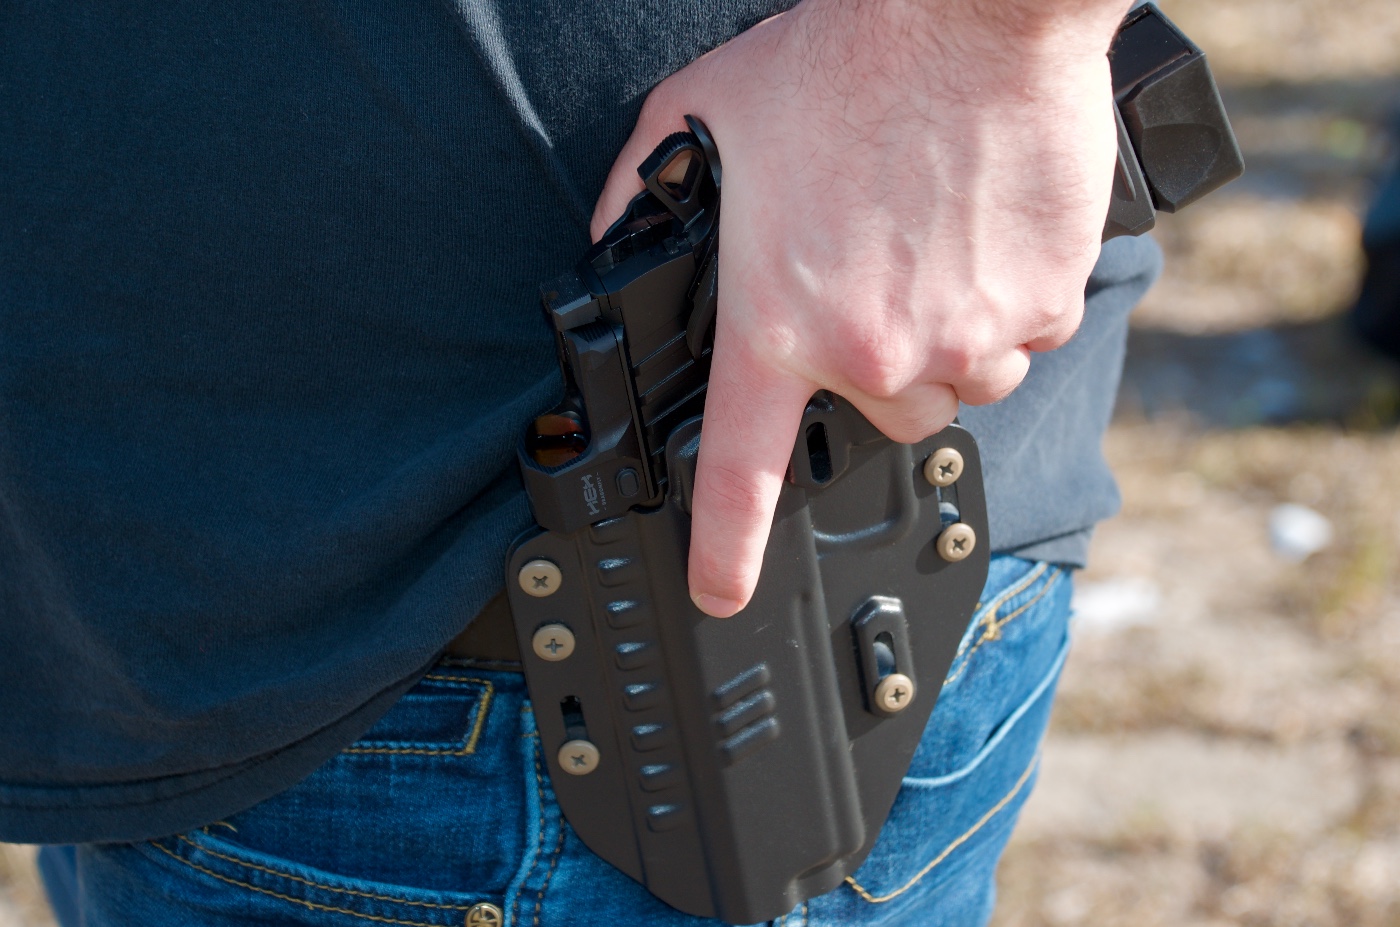 owb holster for the springfield prodigy